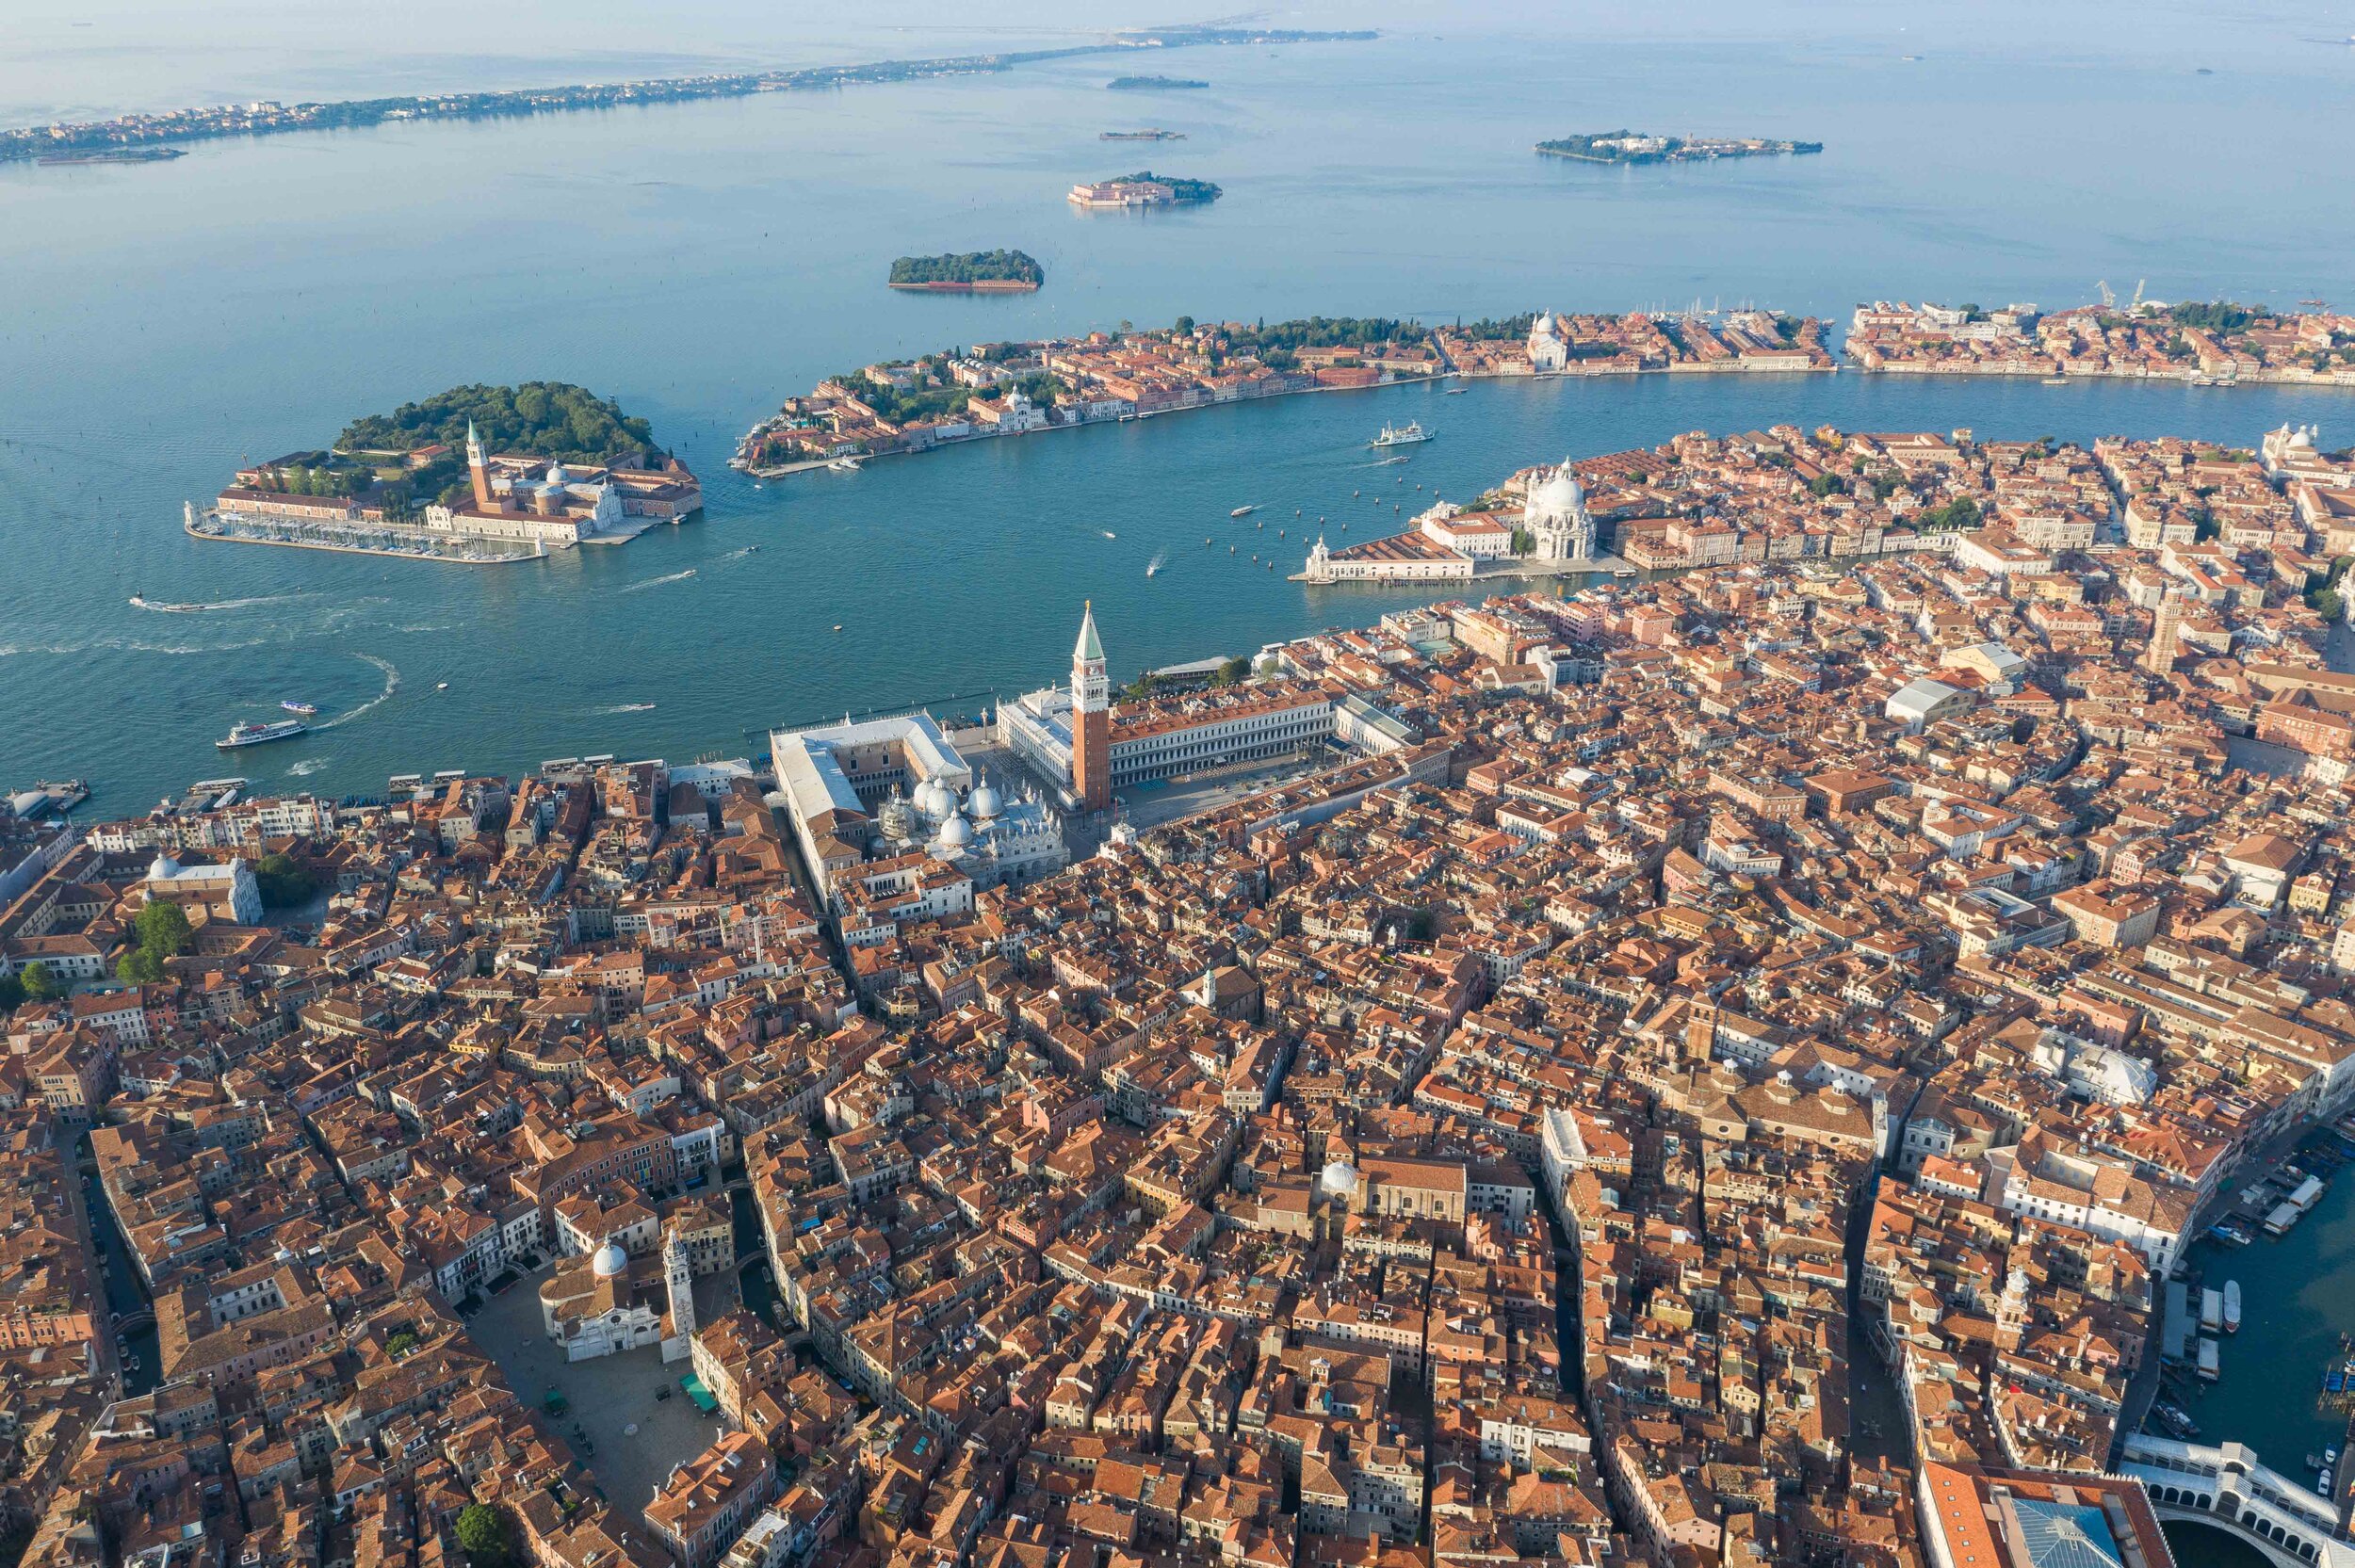  Venice, one of the maritime trade hubs of the Silk Road. It wasn’t only goods from the east that flowed through the city but people and ideas also shaping the city that we know today. 